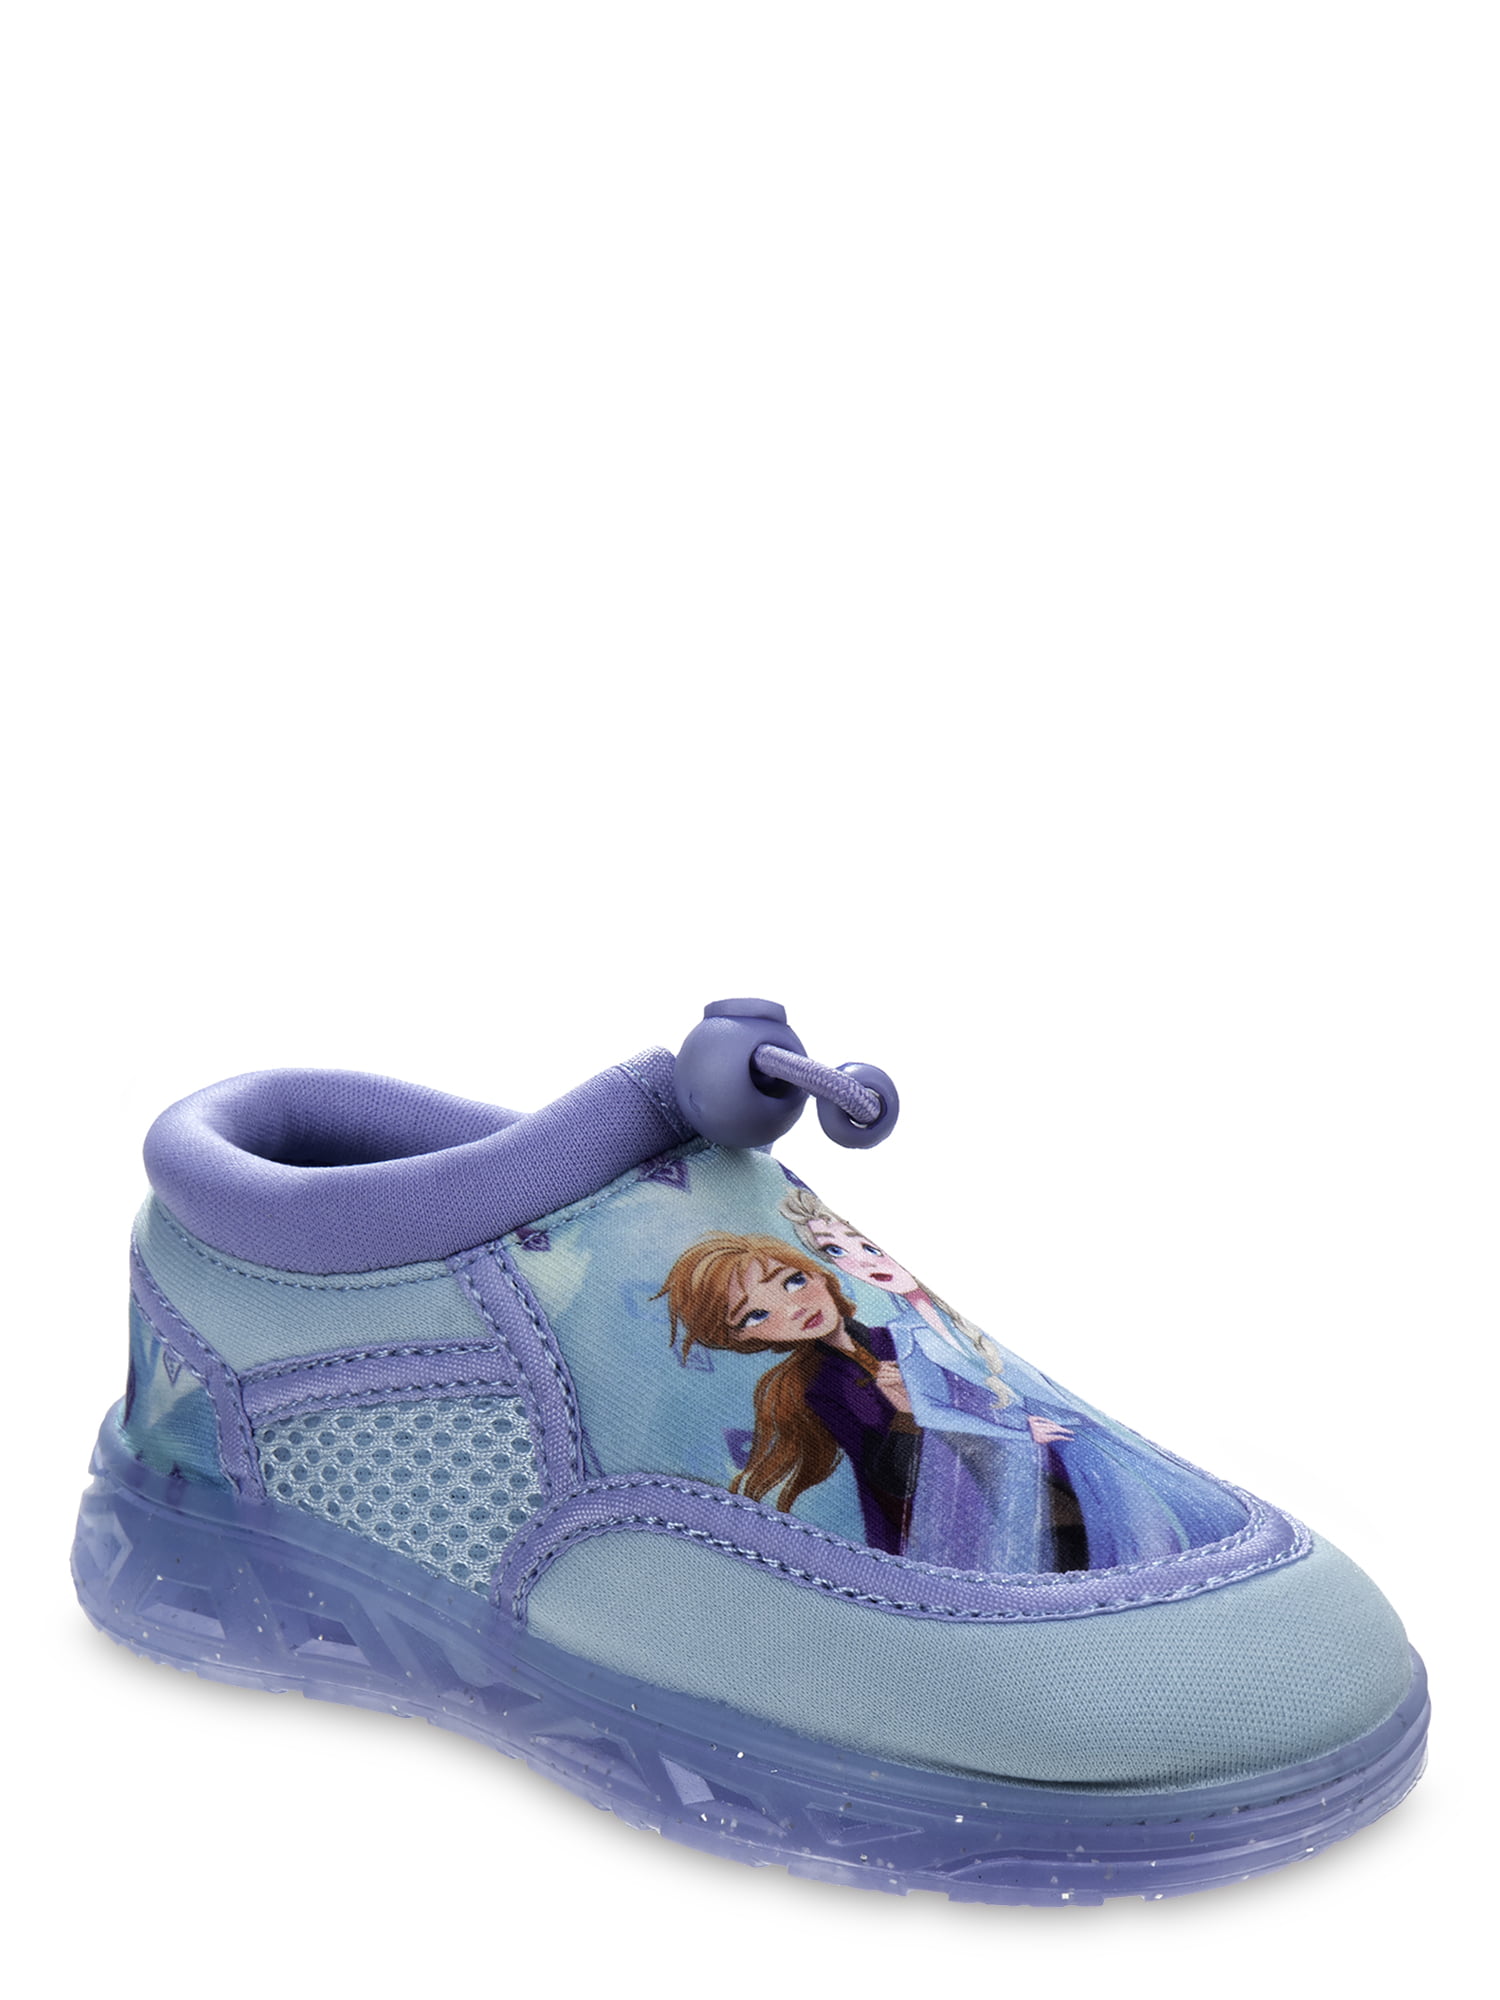 disney water shoes